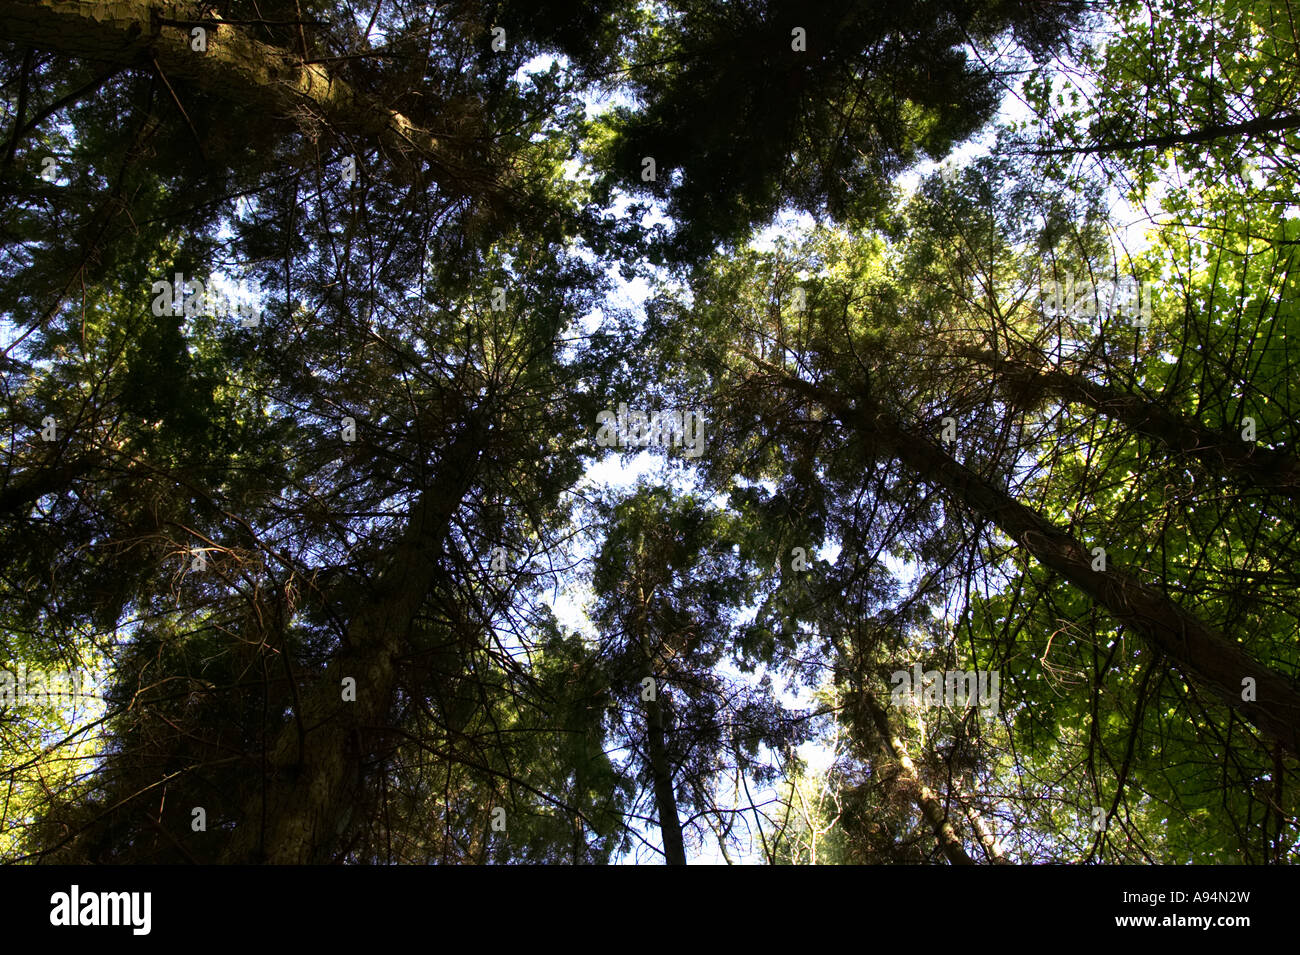 looking up towards the tree canopy and sky garvagh forest Stock Photo